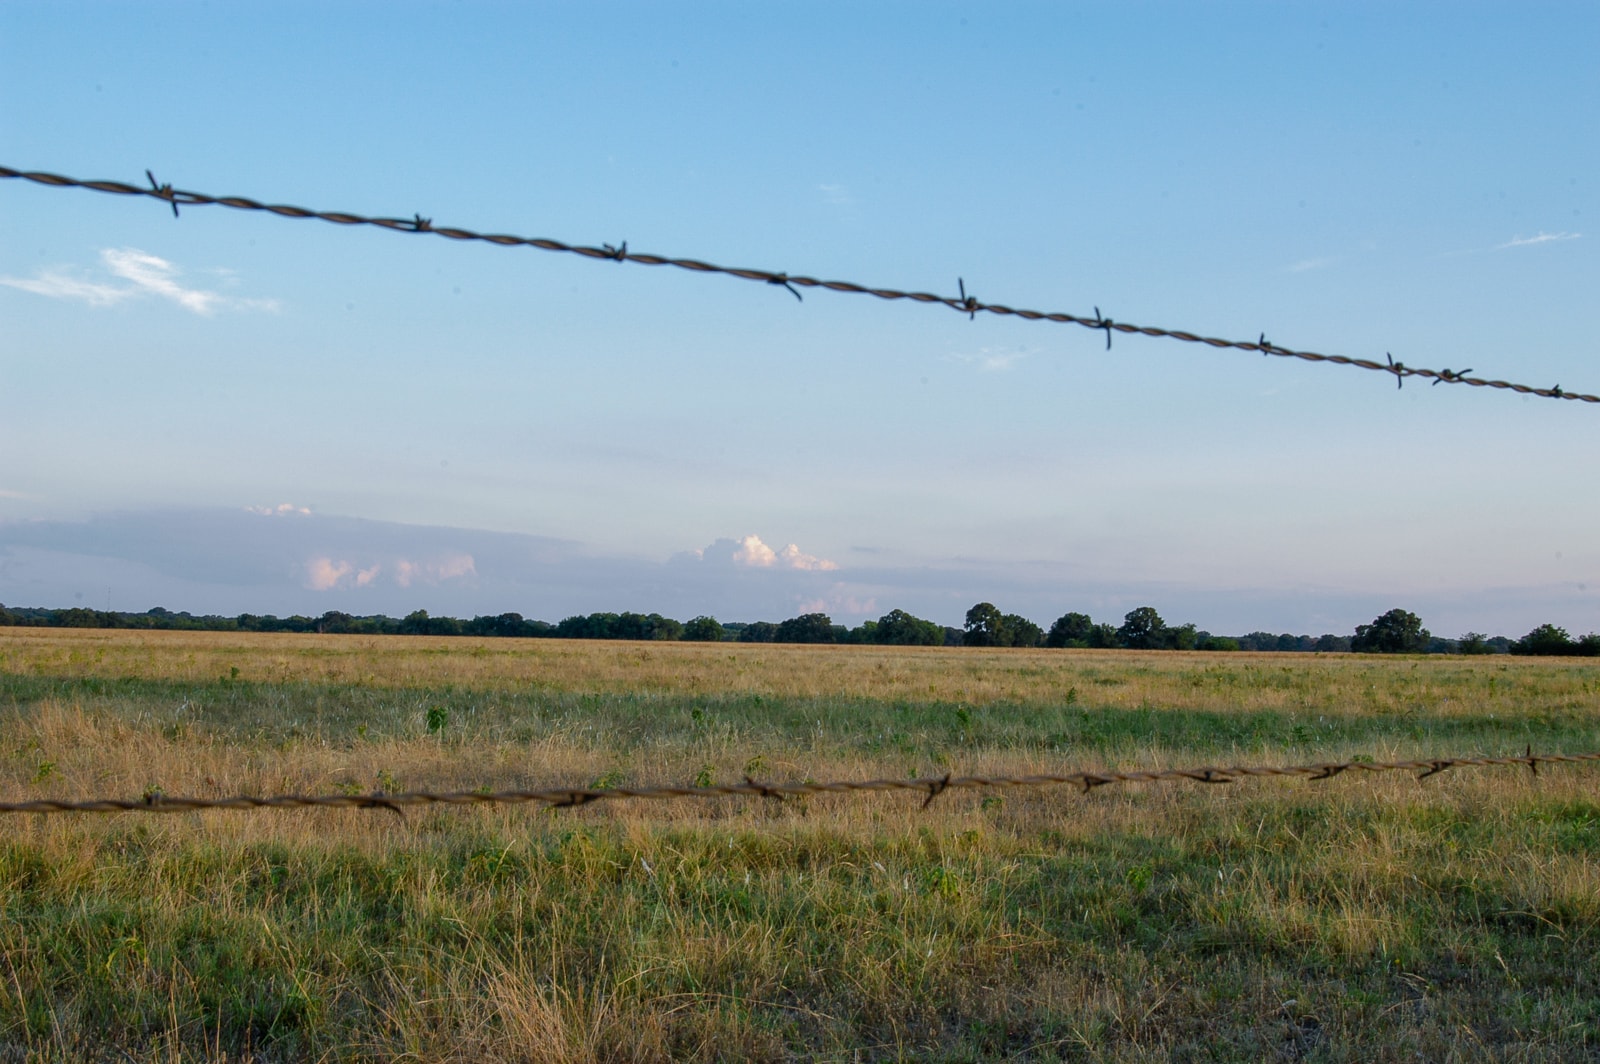 An East Texas landscape with barbed wire